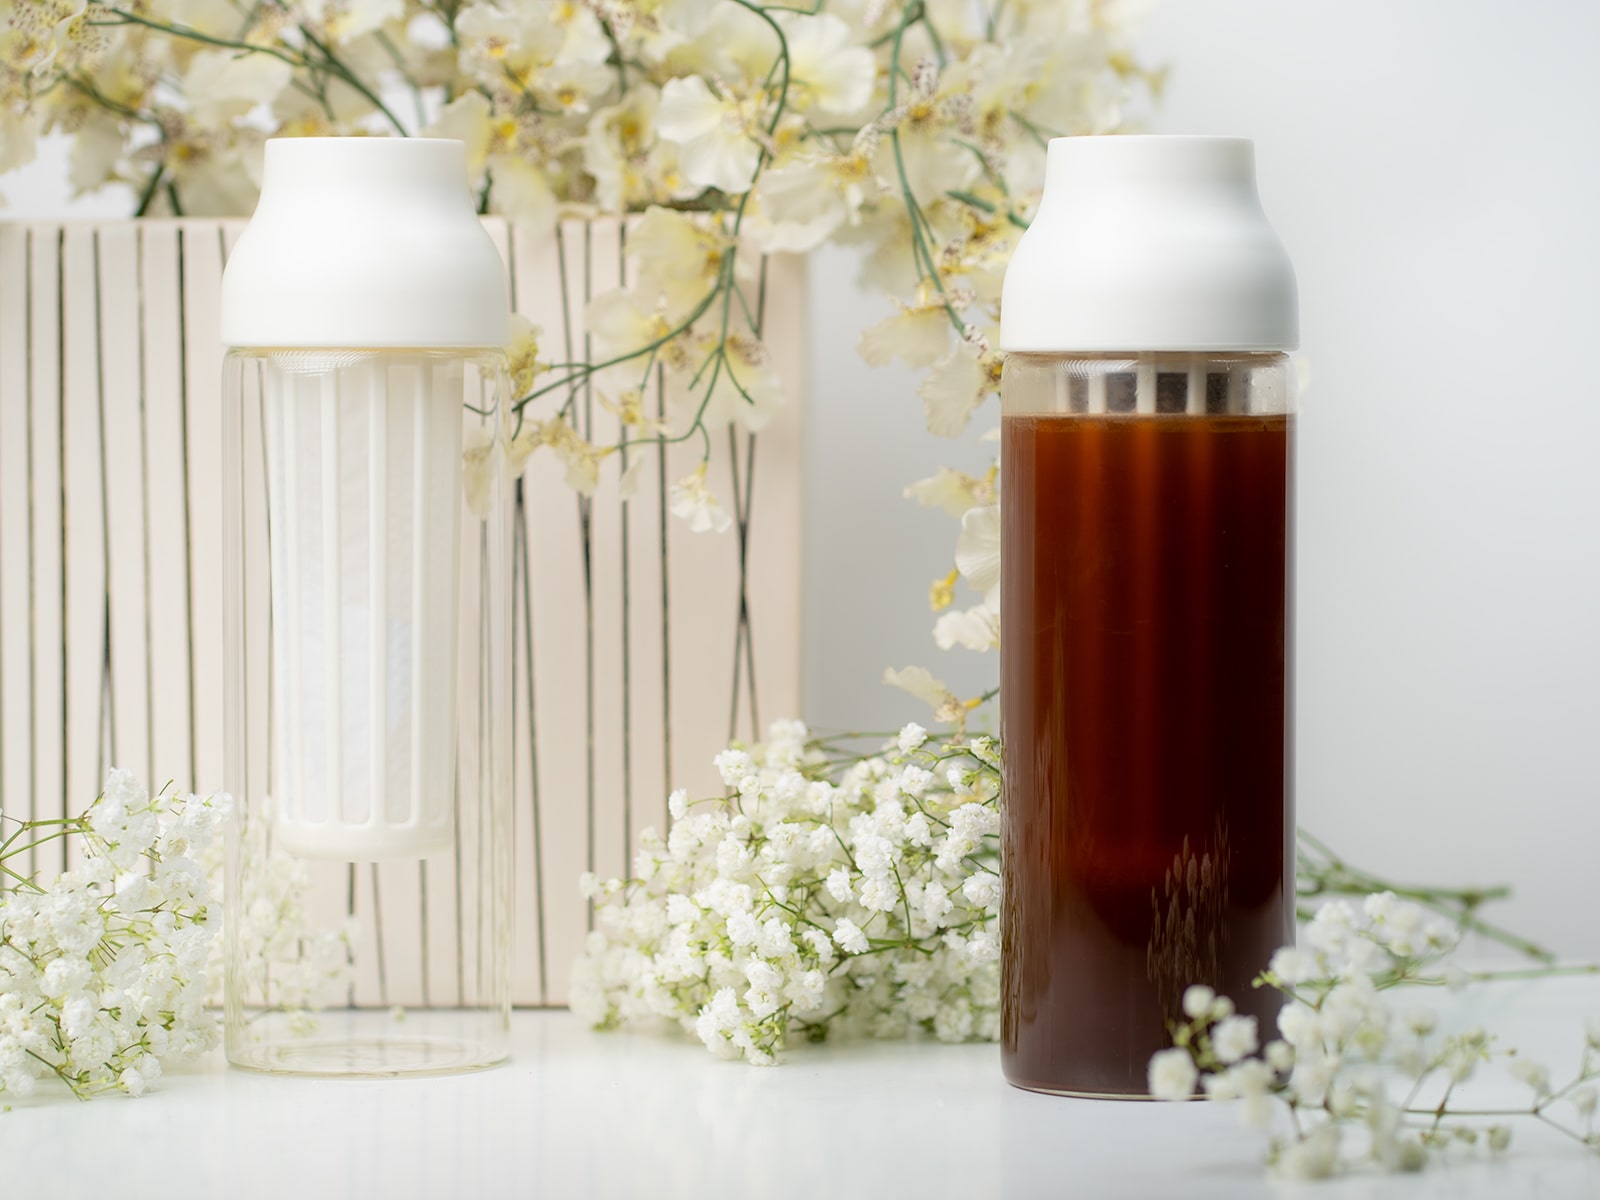 Kinto Capsule Cold Brew Maker next to flowers